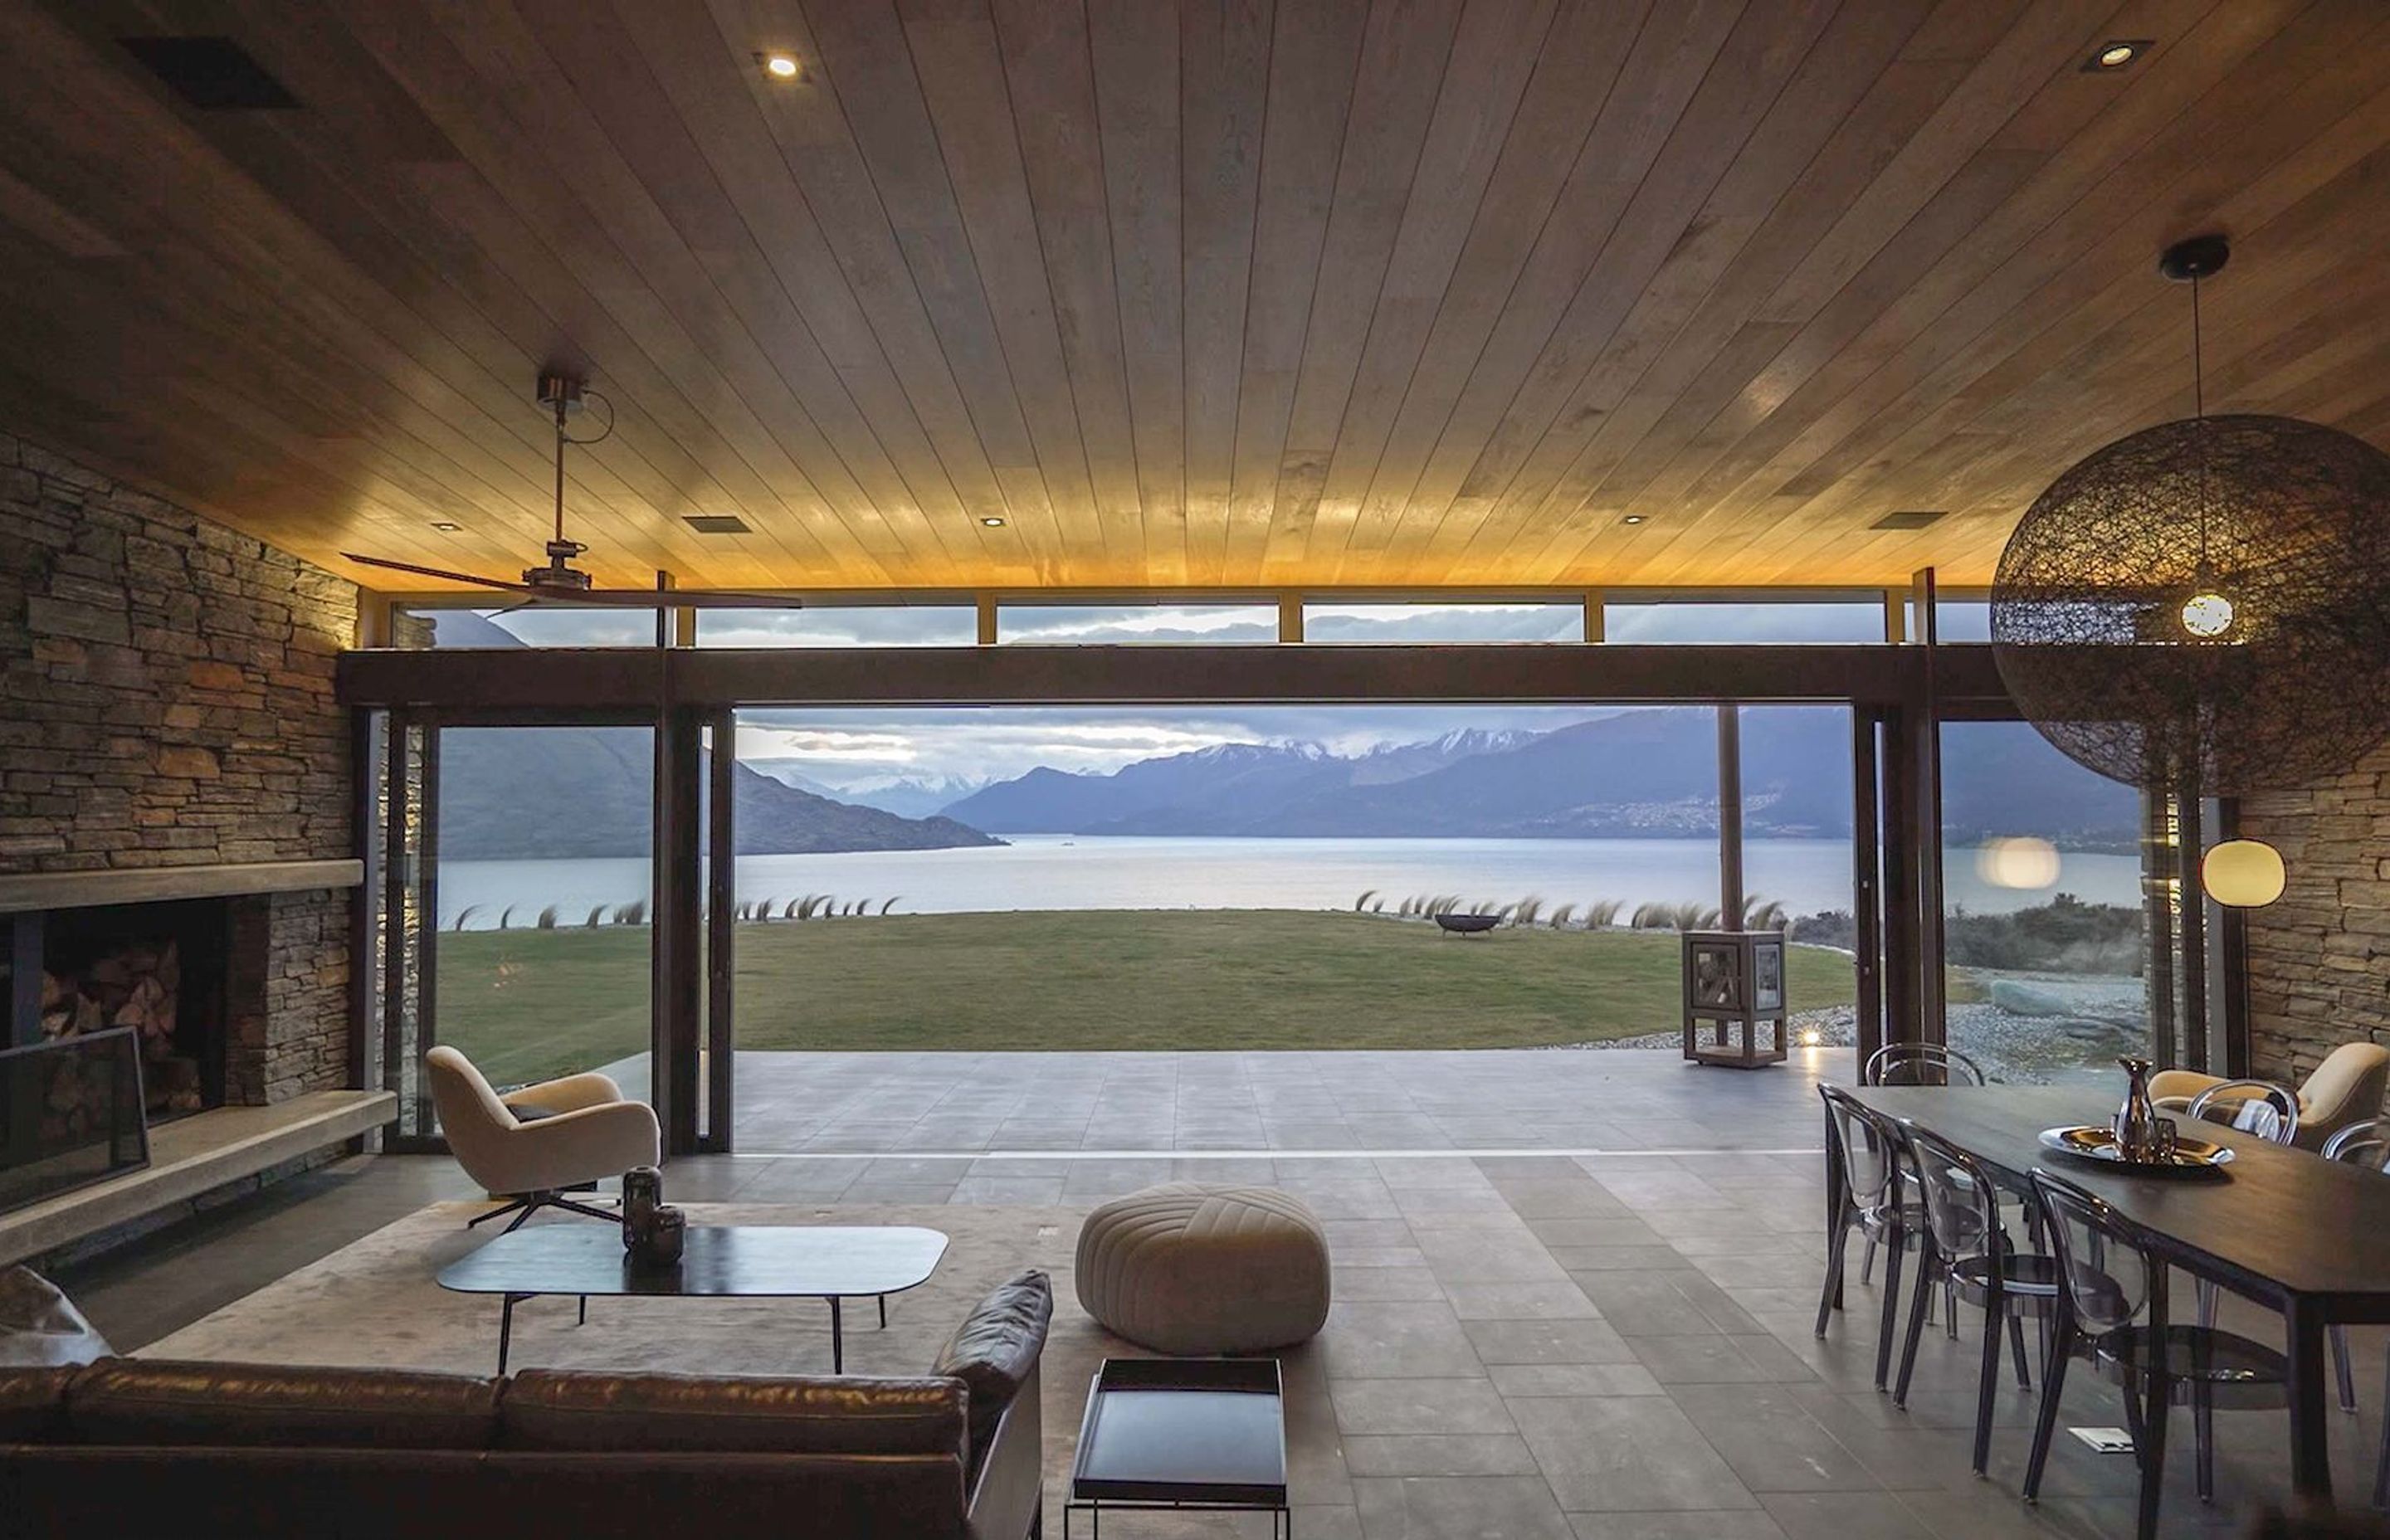 The living/dining area looks straight out over the lake and mountains. Photograph: ArchiPro.